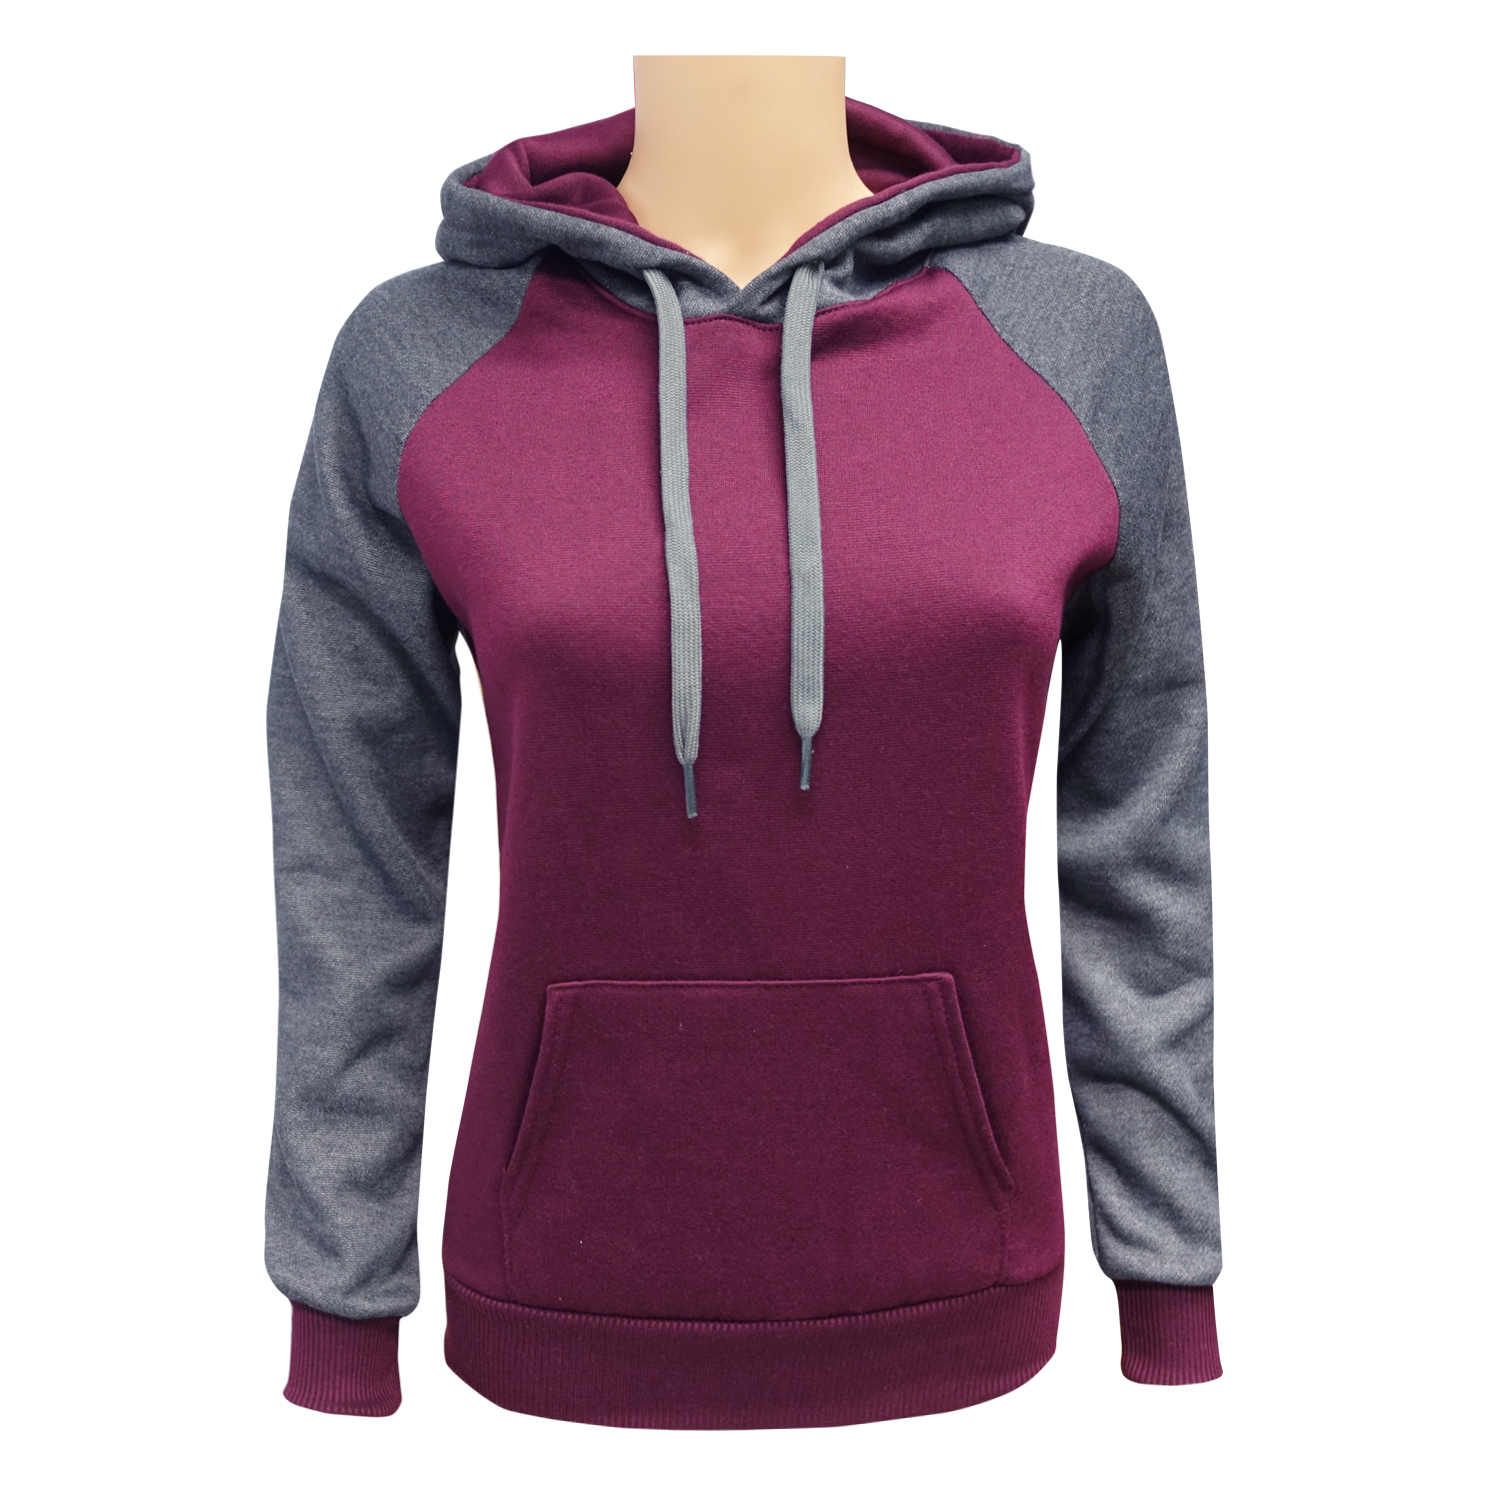 hill-apparel-women-s-two-tone-pullover-hoodie